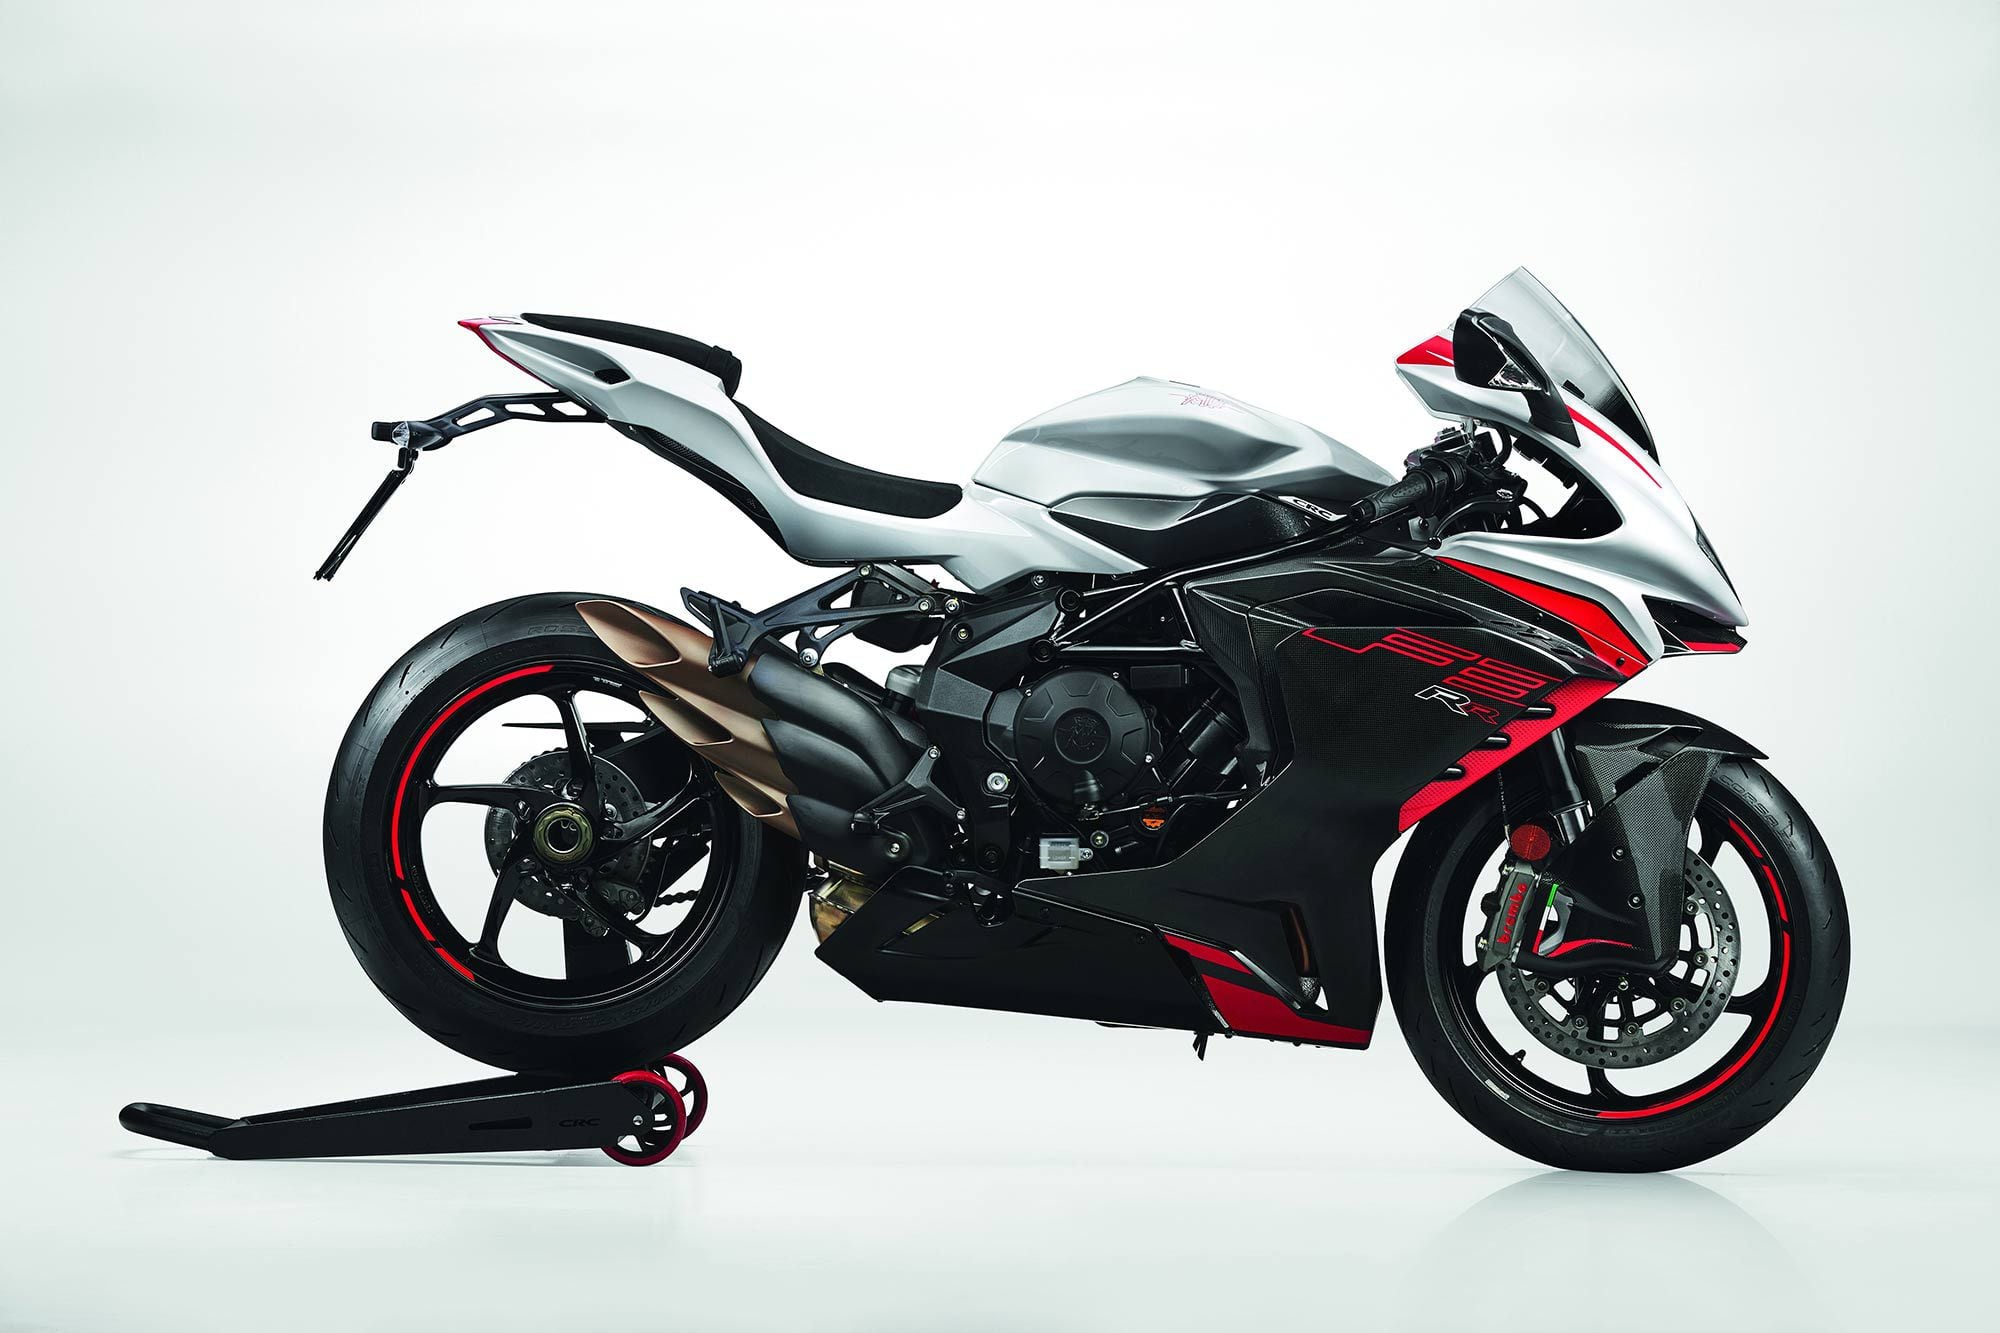 The new F3 RR showcases MV’s signature three-pipe exhaust. Note the improved fairing coverage. The crisp, sharp design elements help it stand out in the supersport world too. Like all the new MV triples, it meets Euro 5 emissions requirements.